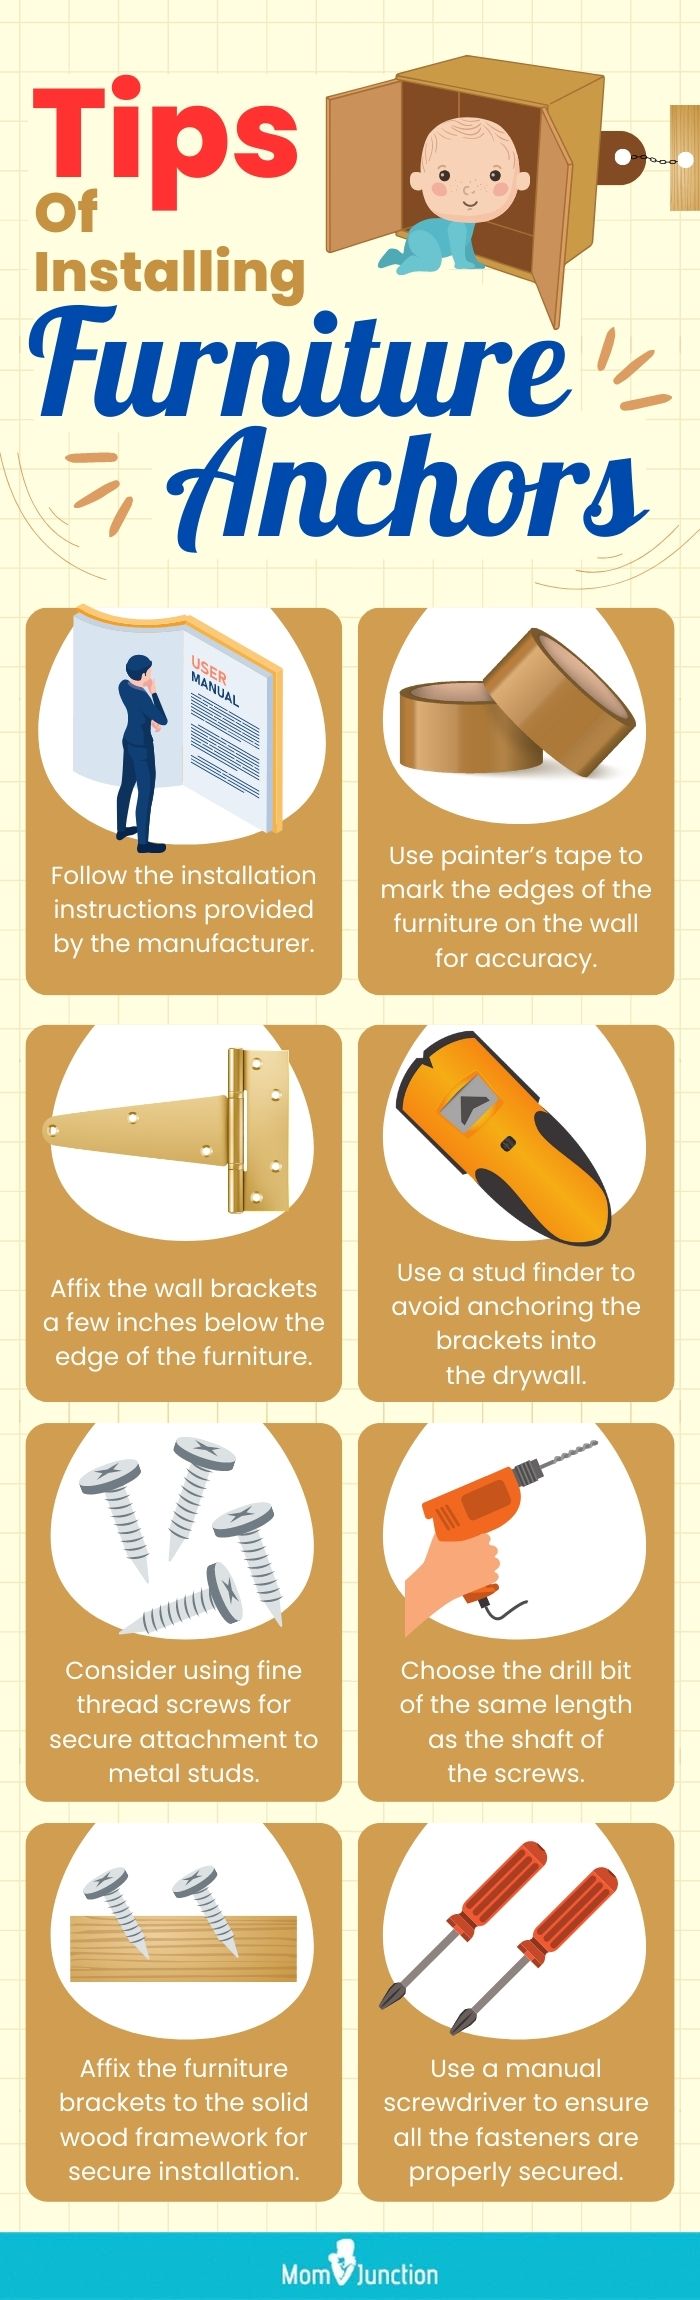 Tips For Installing Furniture Anchors (infographic)